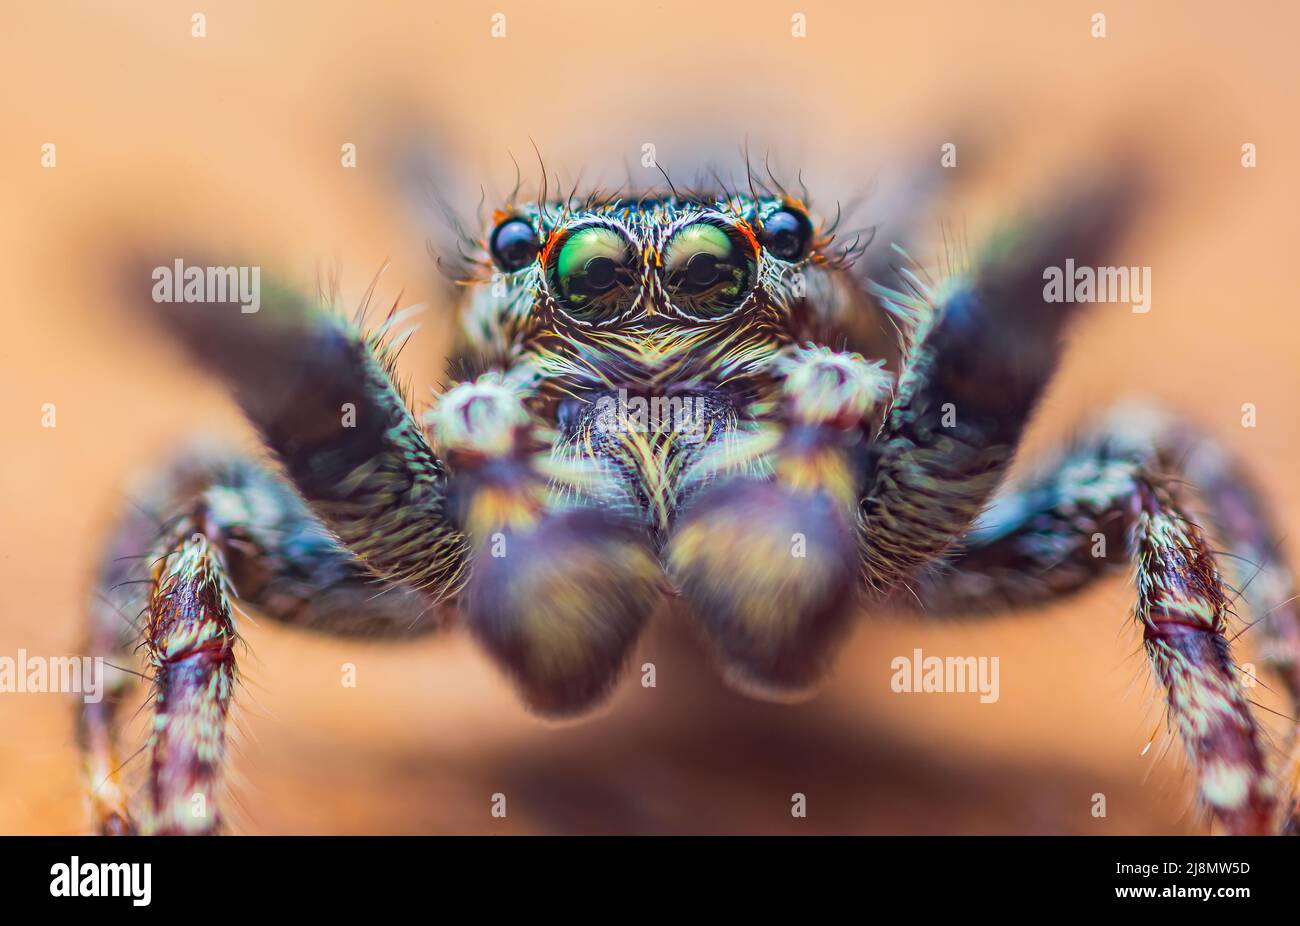 Extreme magnification - Jumping spider portrait, front view Stock Photo